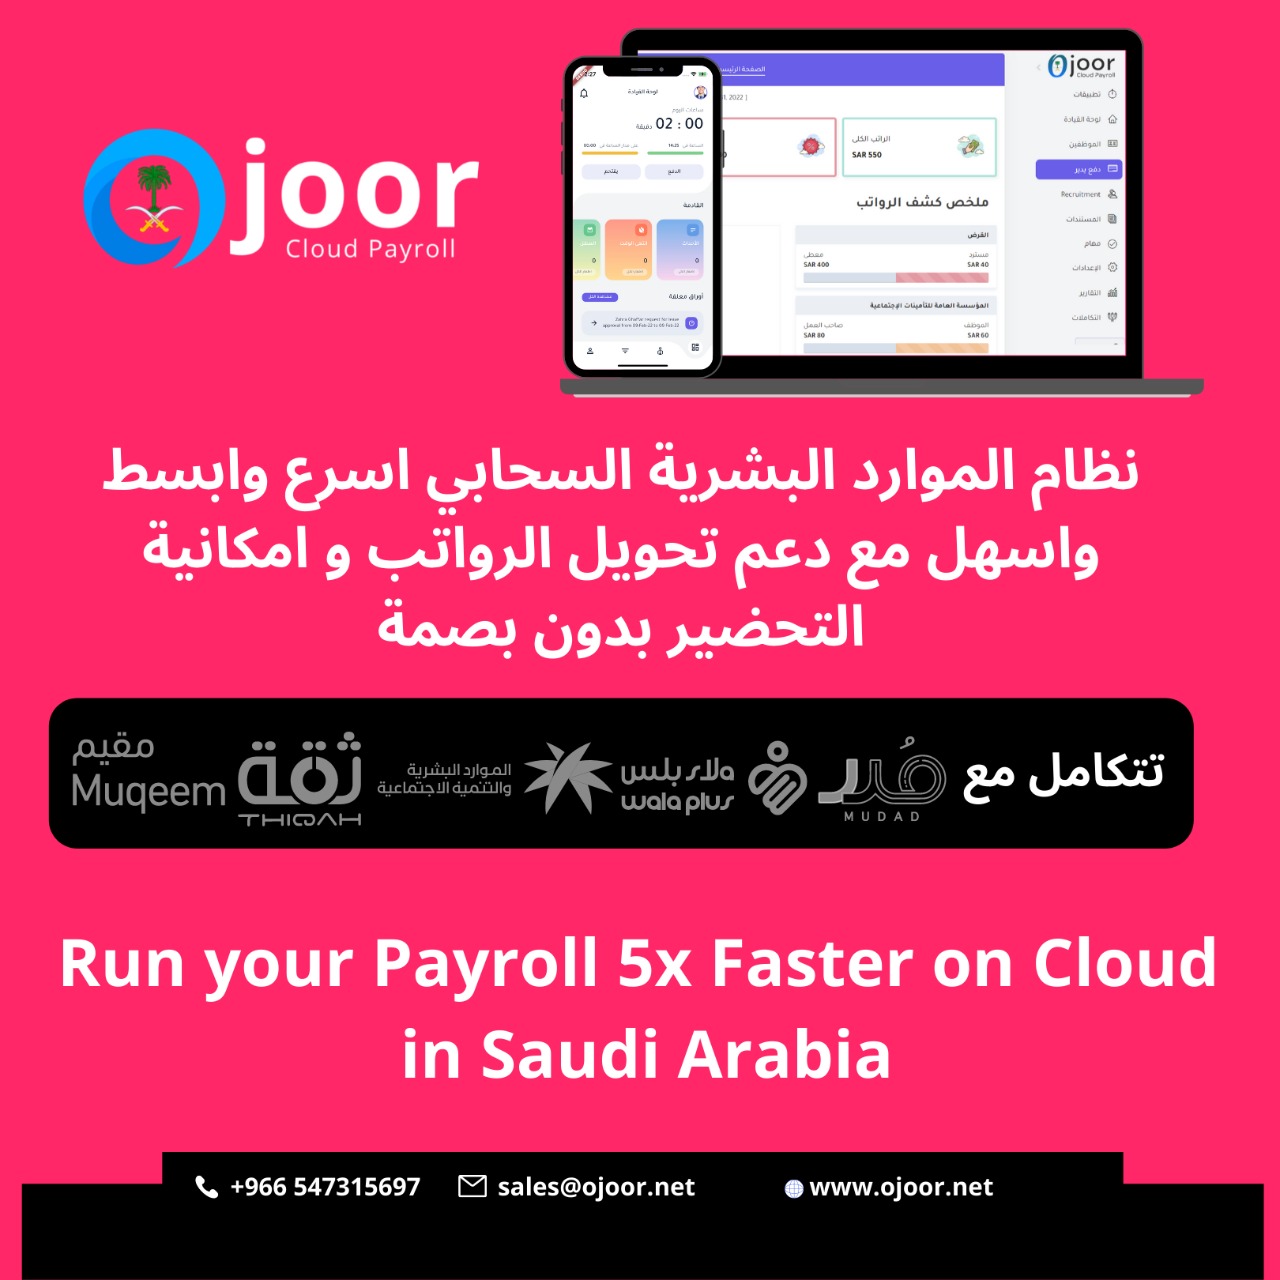 What is a Payroll System in Saudi and how does it work?